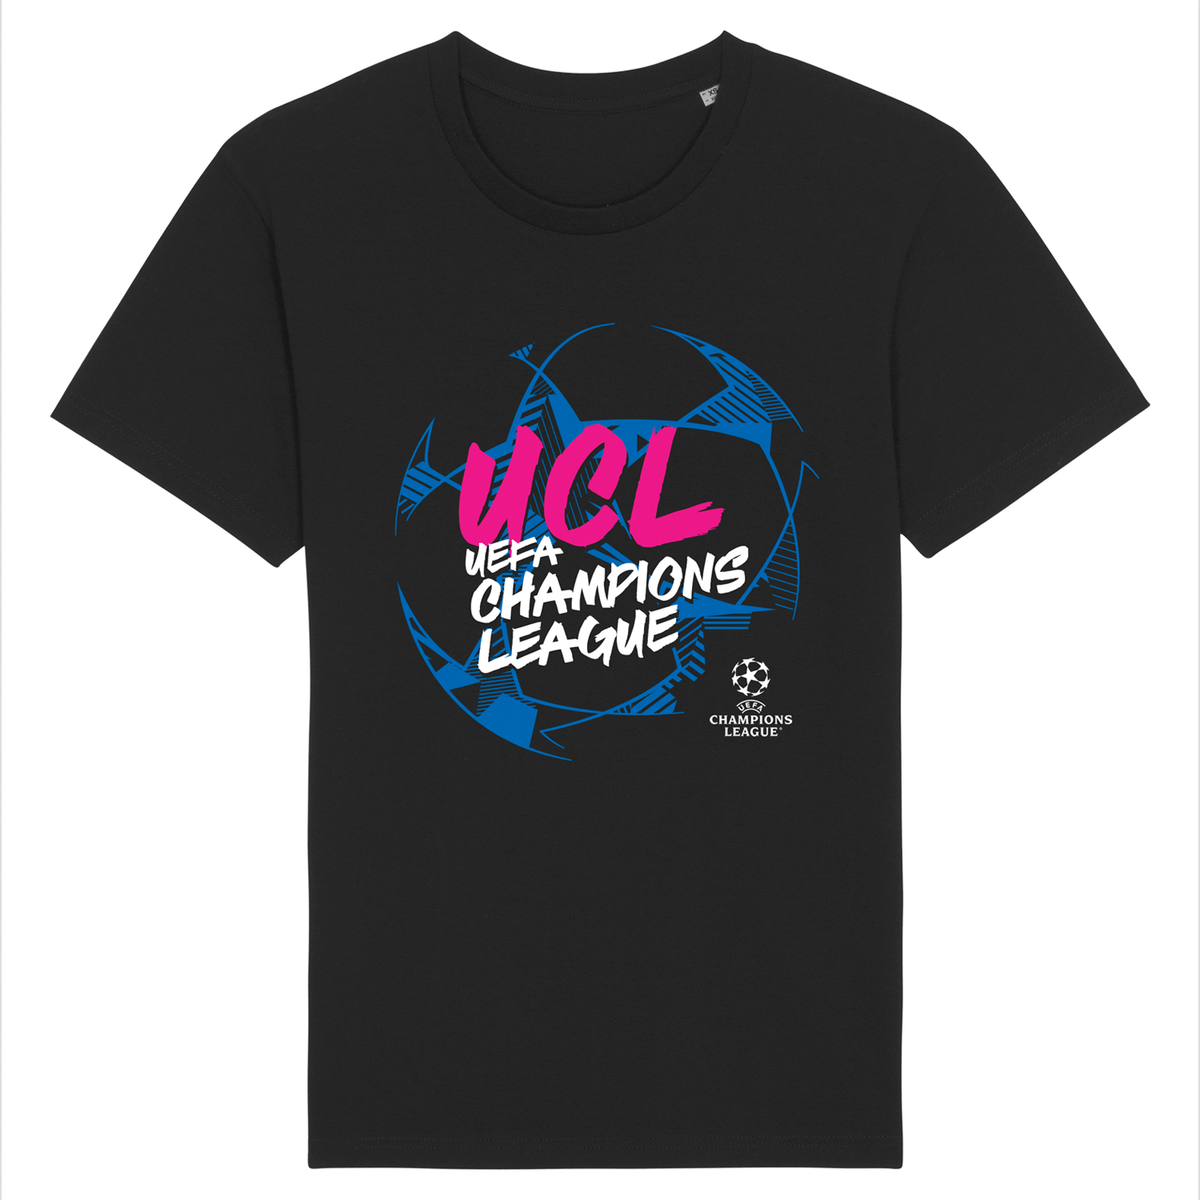 UEFA Champions League - UCL Starball Black T-Shirt UEFA Club Competitions Online Store